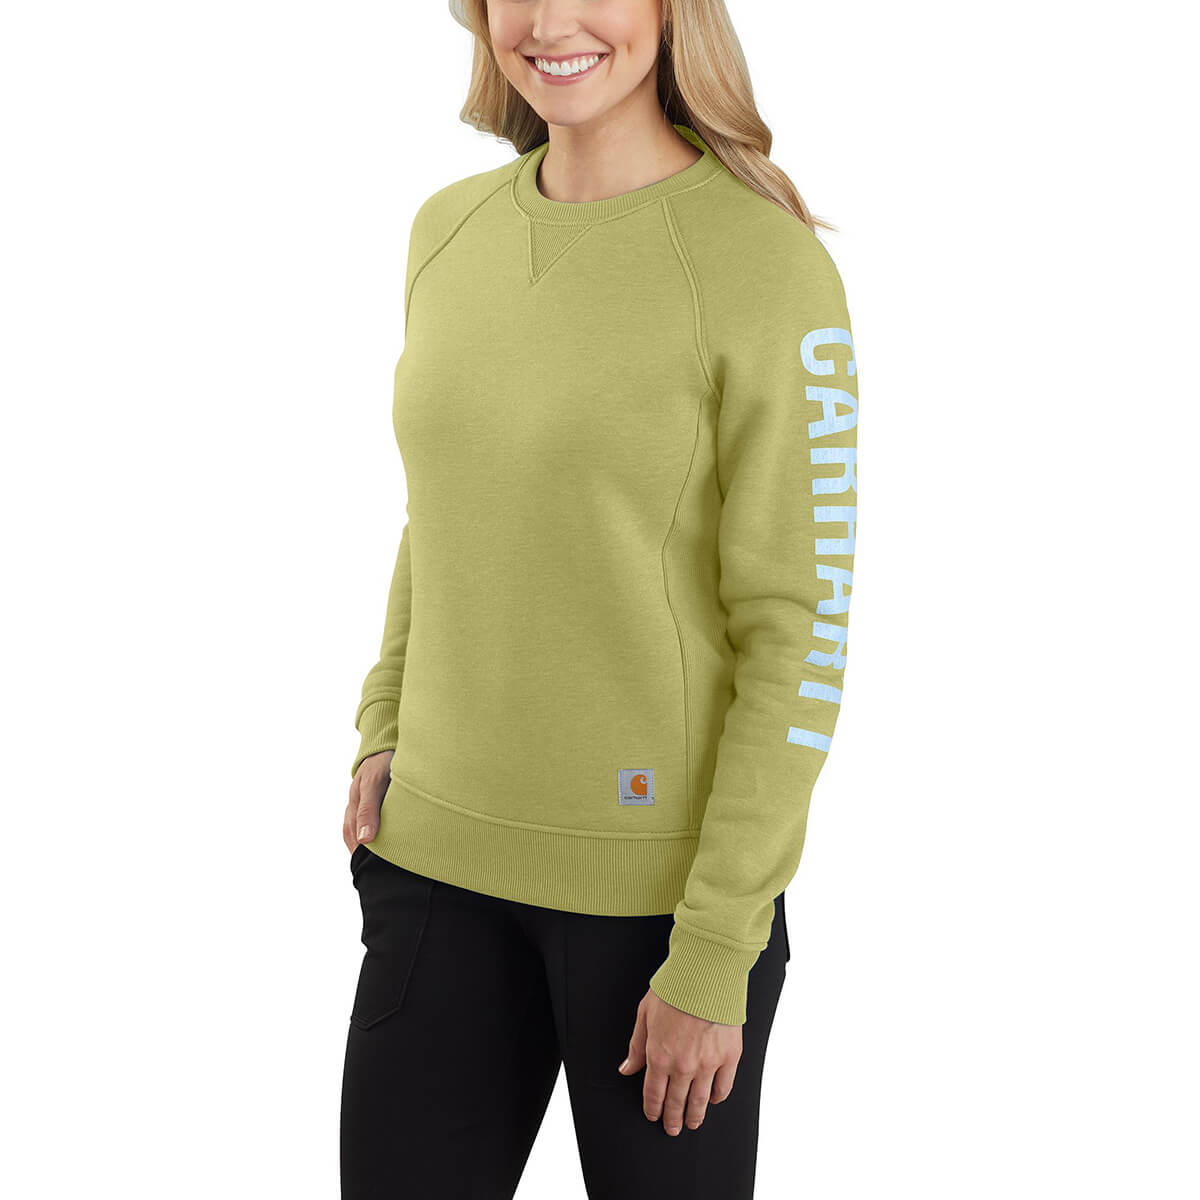 Carhartt Relaxed Fit Midweight Crewneck Block Logo Sleeve Graphic Sweatshirt - Olive